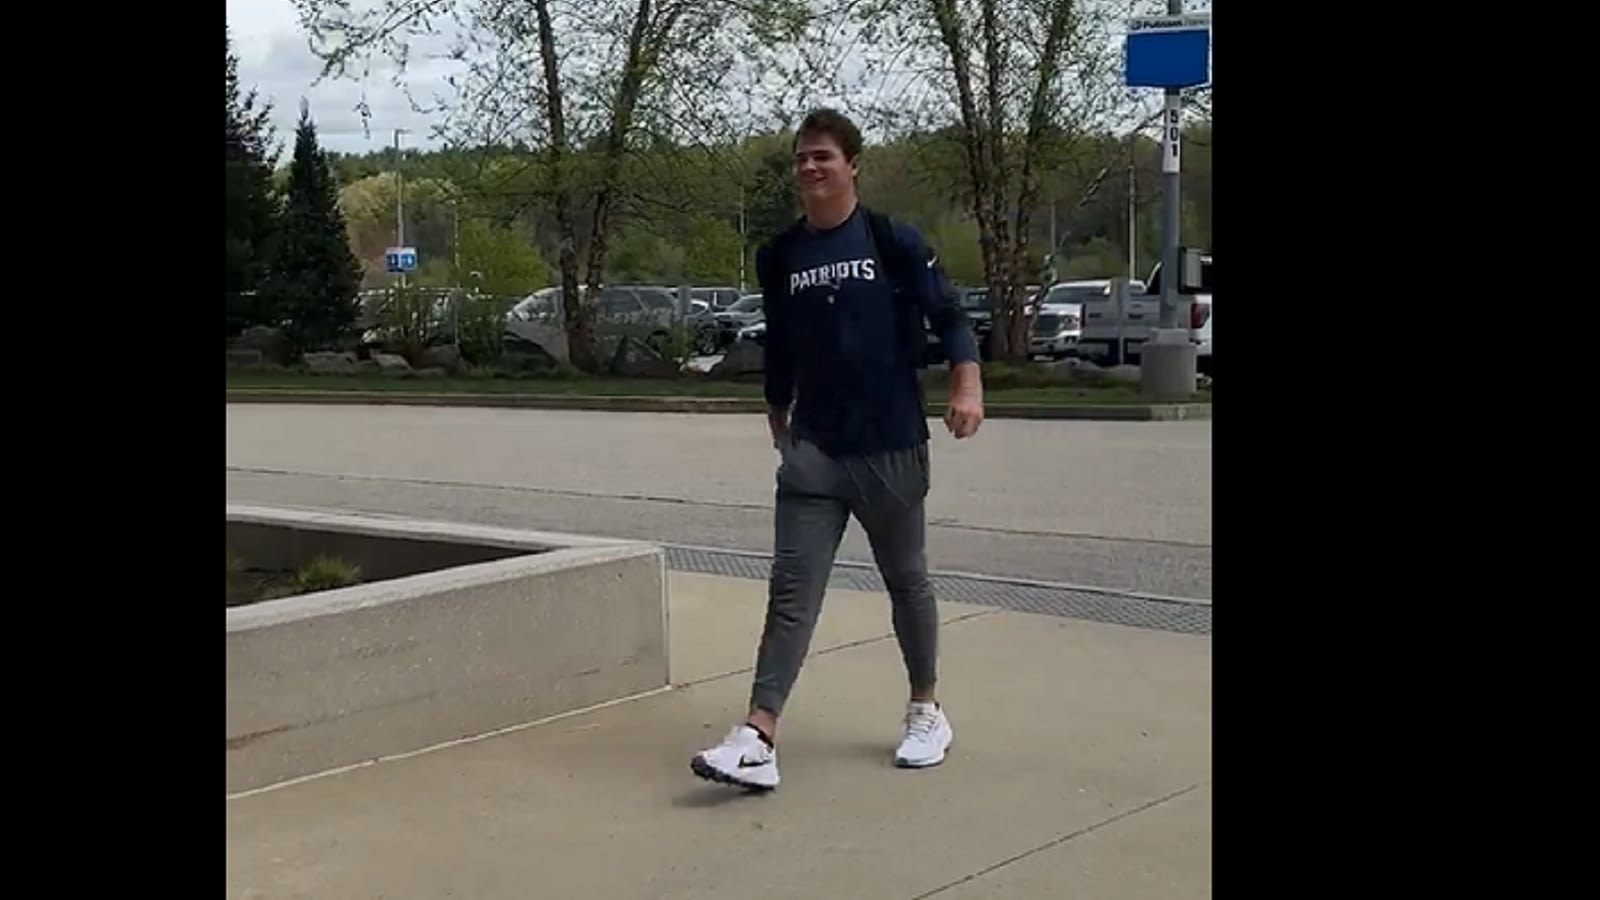 Everyone said the same thing about Drake Maye arriving at Patriots' headquarters